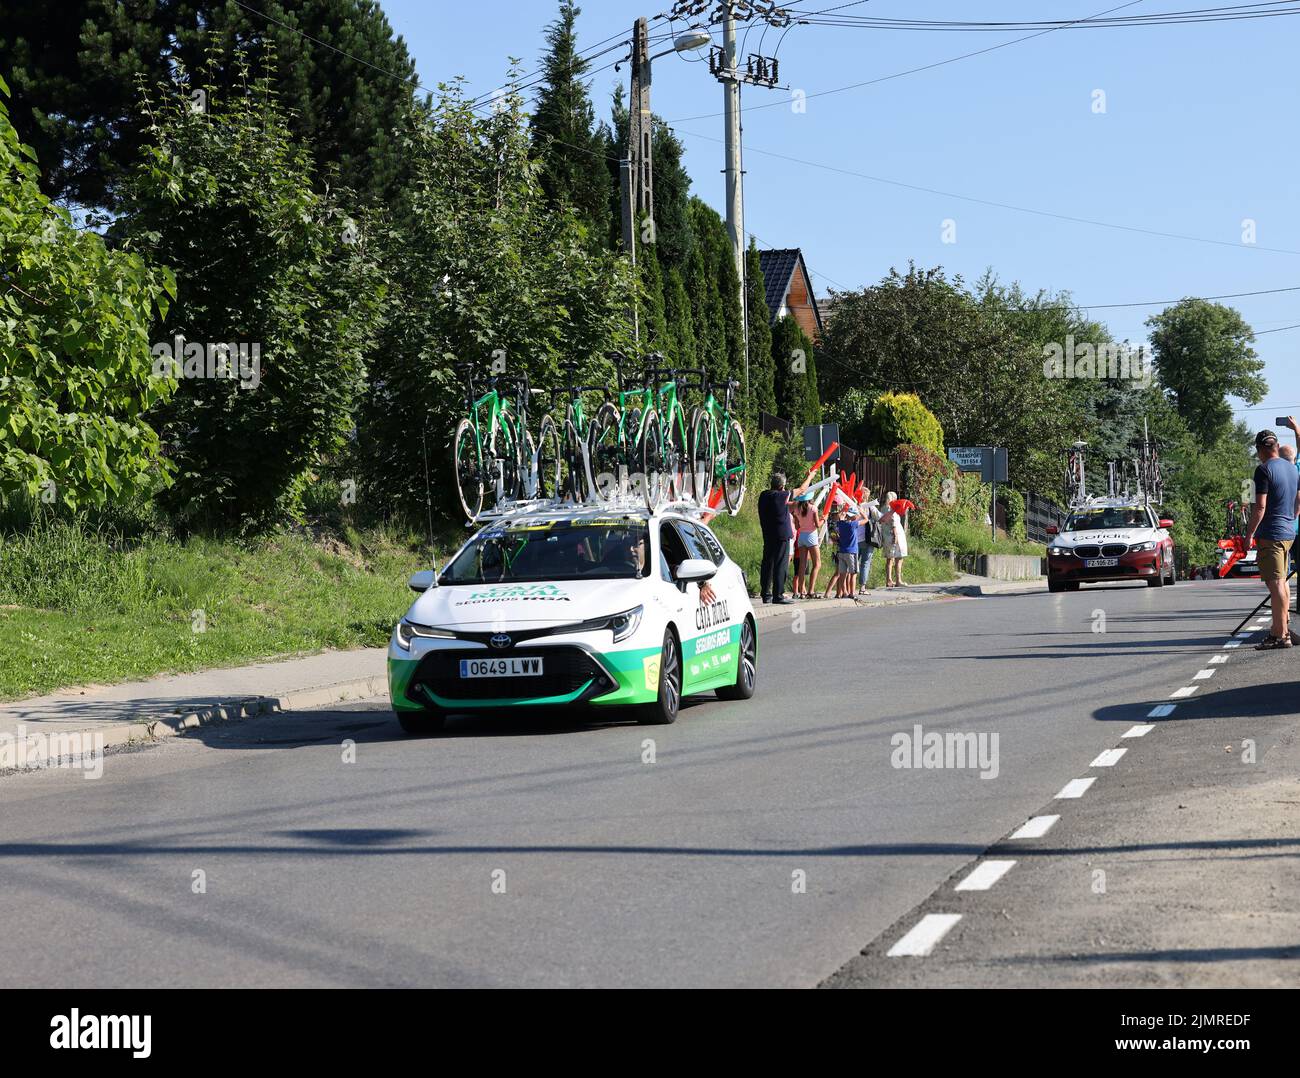 Krakow, Poland - August 5, 2022:  Caja Rural Team vehicle on the route of Tour de Pologne UCI – World Tour, stage 7 Skawina - Krakow. The biggest cycling event in Eastern Europe. Stock Photo